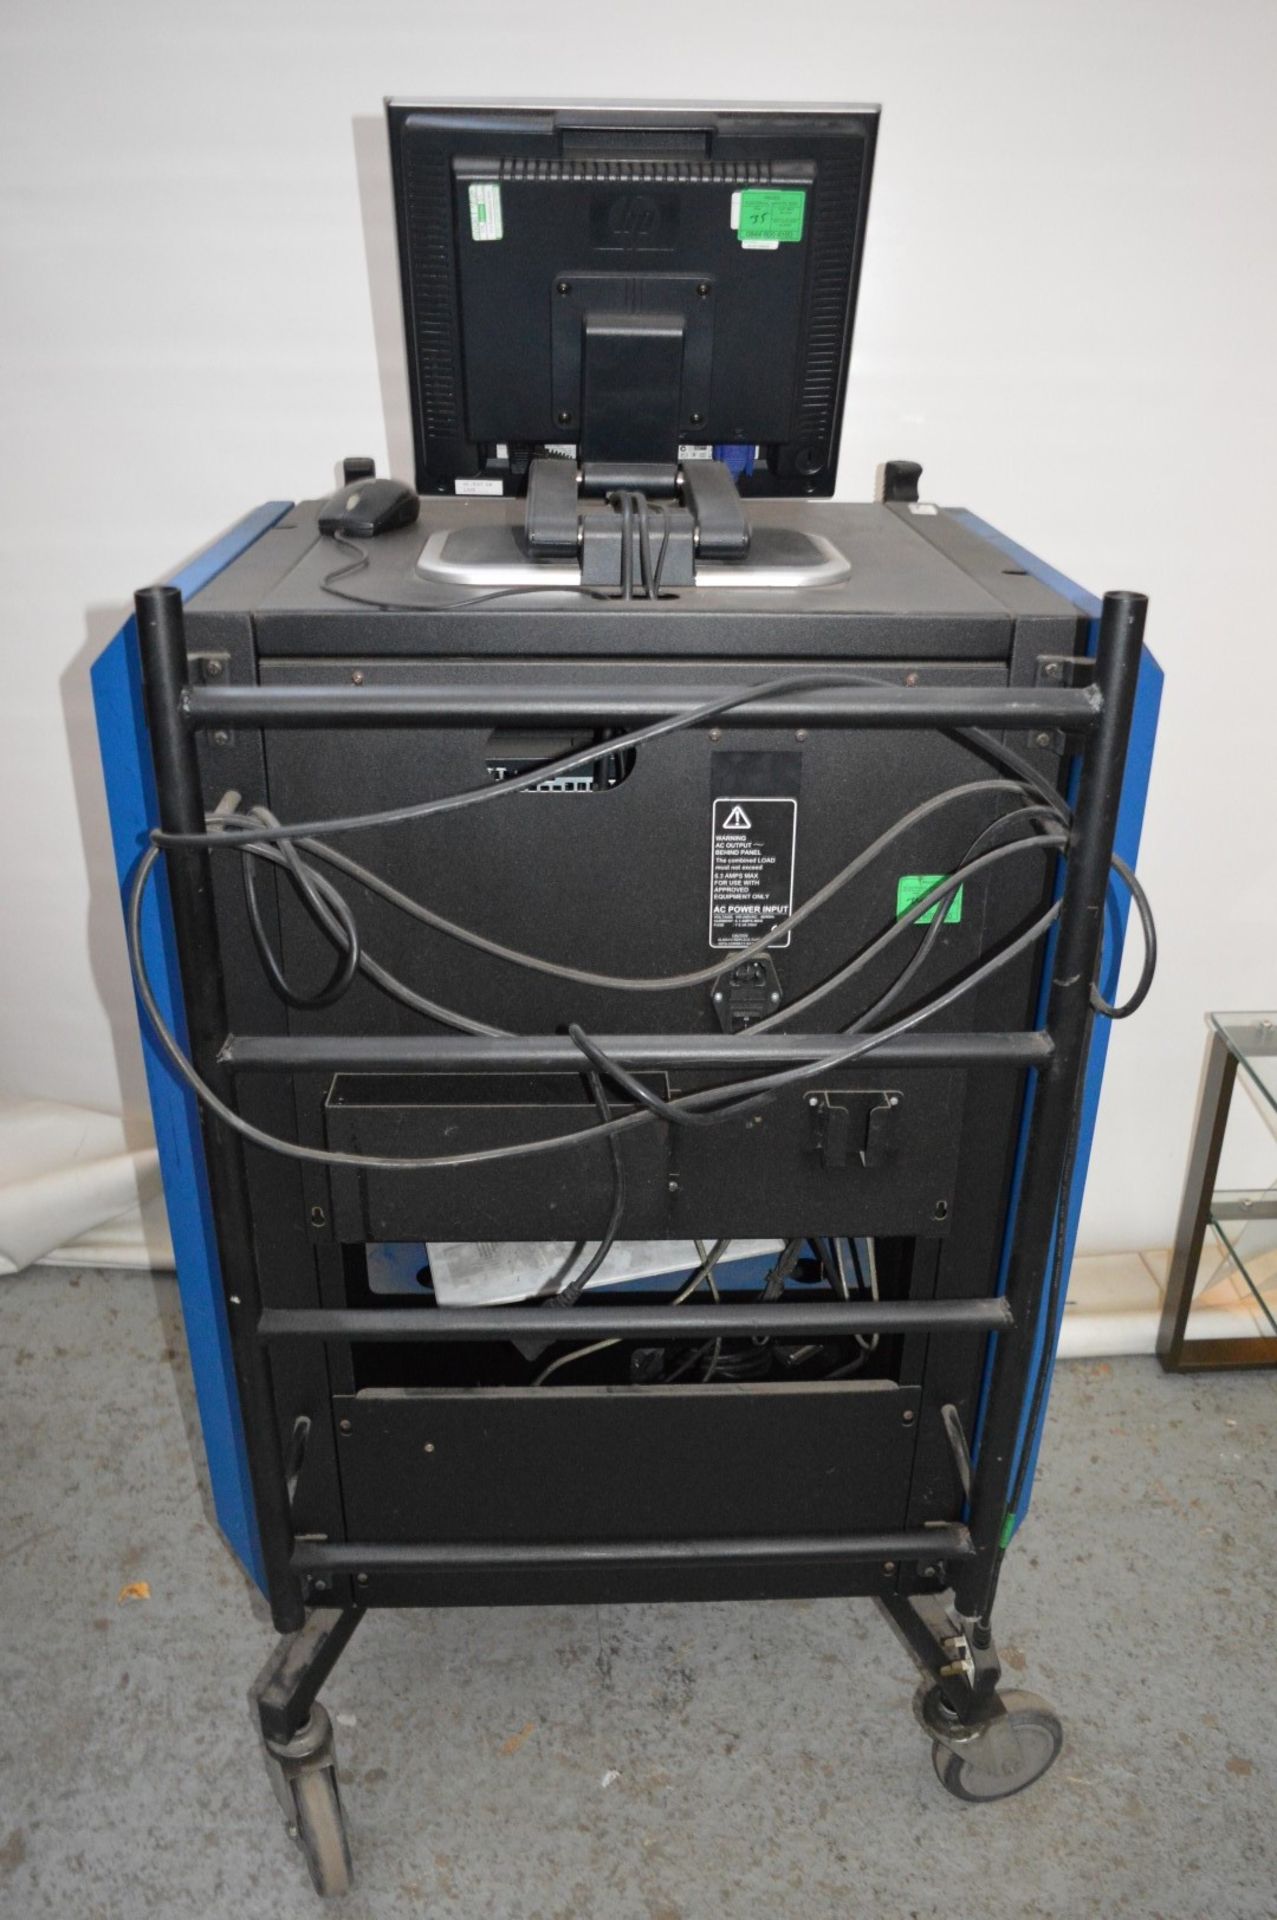 1 x Omitec OmiTechCenter Automotive Diagnostic Workstation - Please View The Pictures Provided - - Image 17 of 21